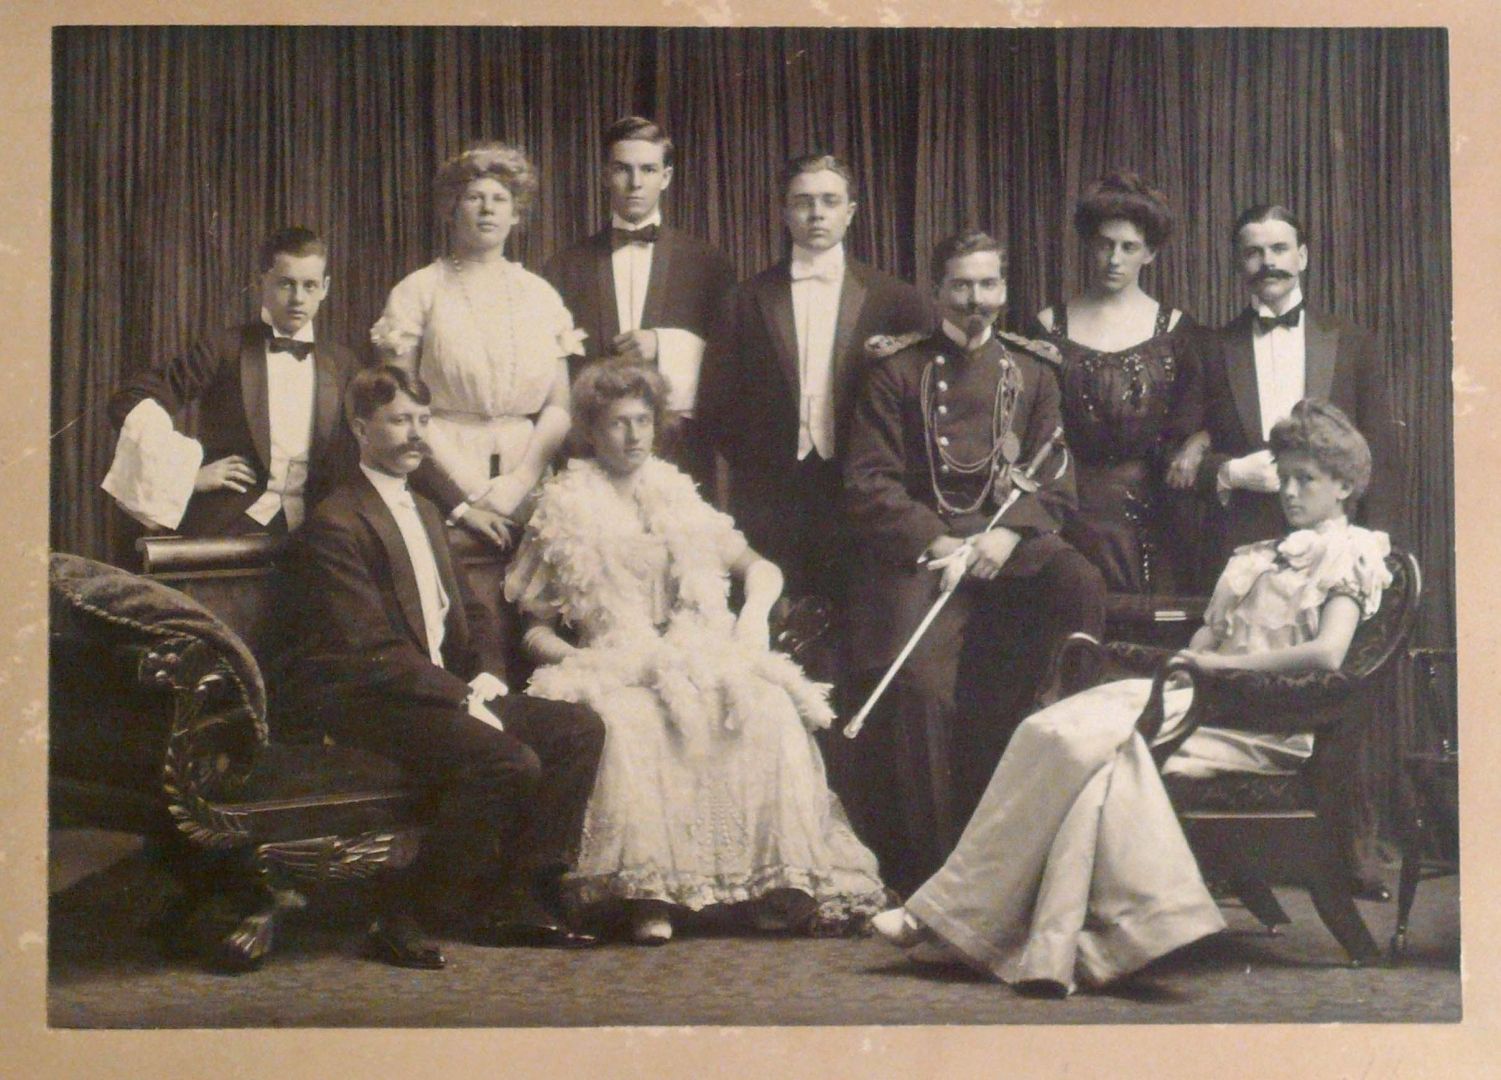 CAST PHOTO FOR A COLLEGE PLAY WITH WOMEN'S ROLES PLAYED BY MEN